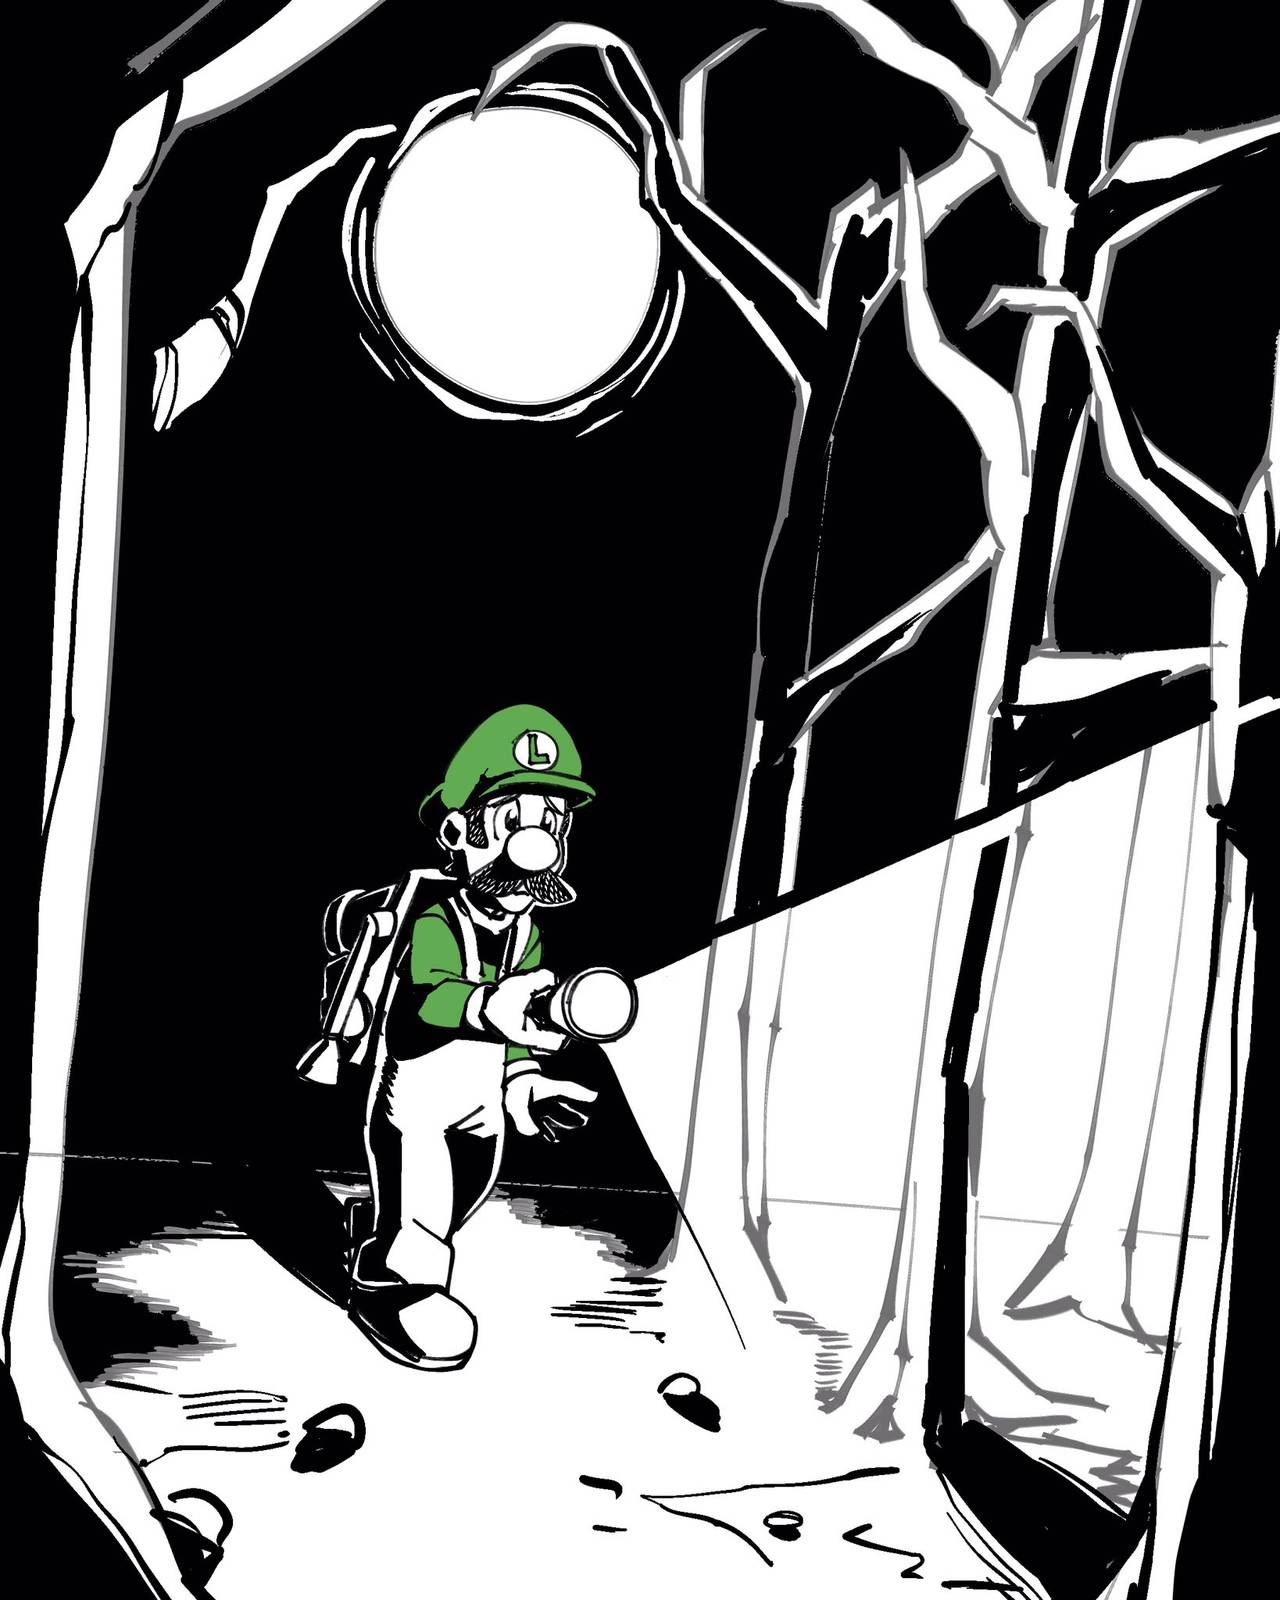 [Nisego] Inktober 2019 (Super Mario Brothers) [Ongoing] 8